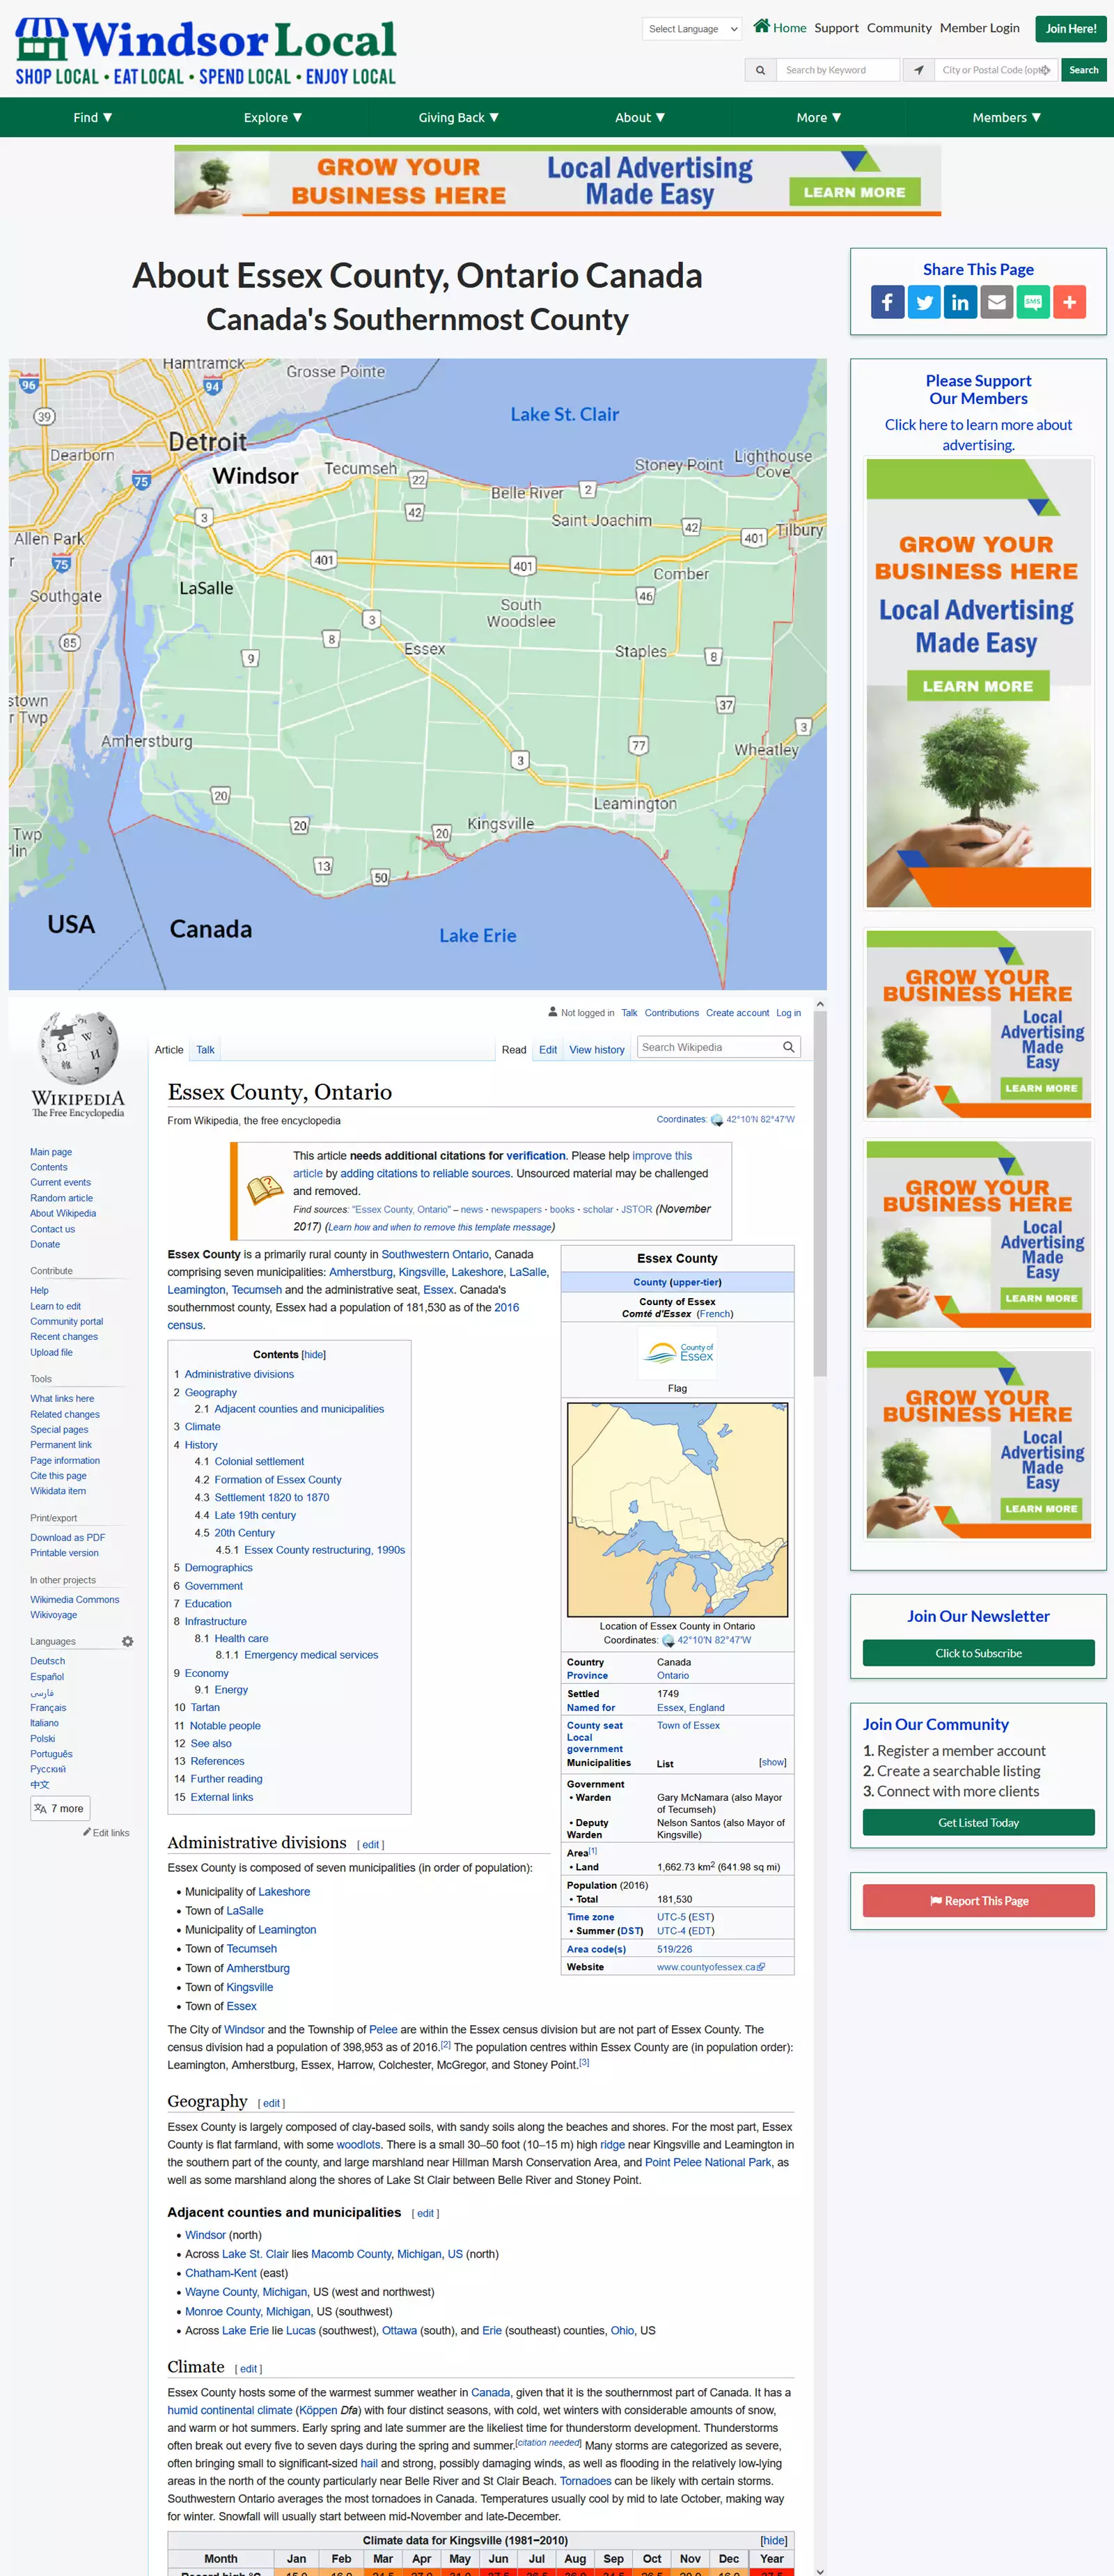 Windsor Local About - Essex County, Ontario Information view